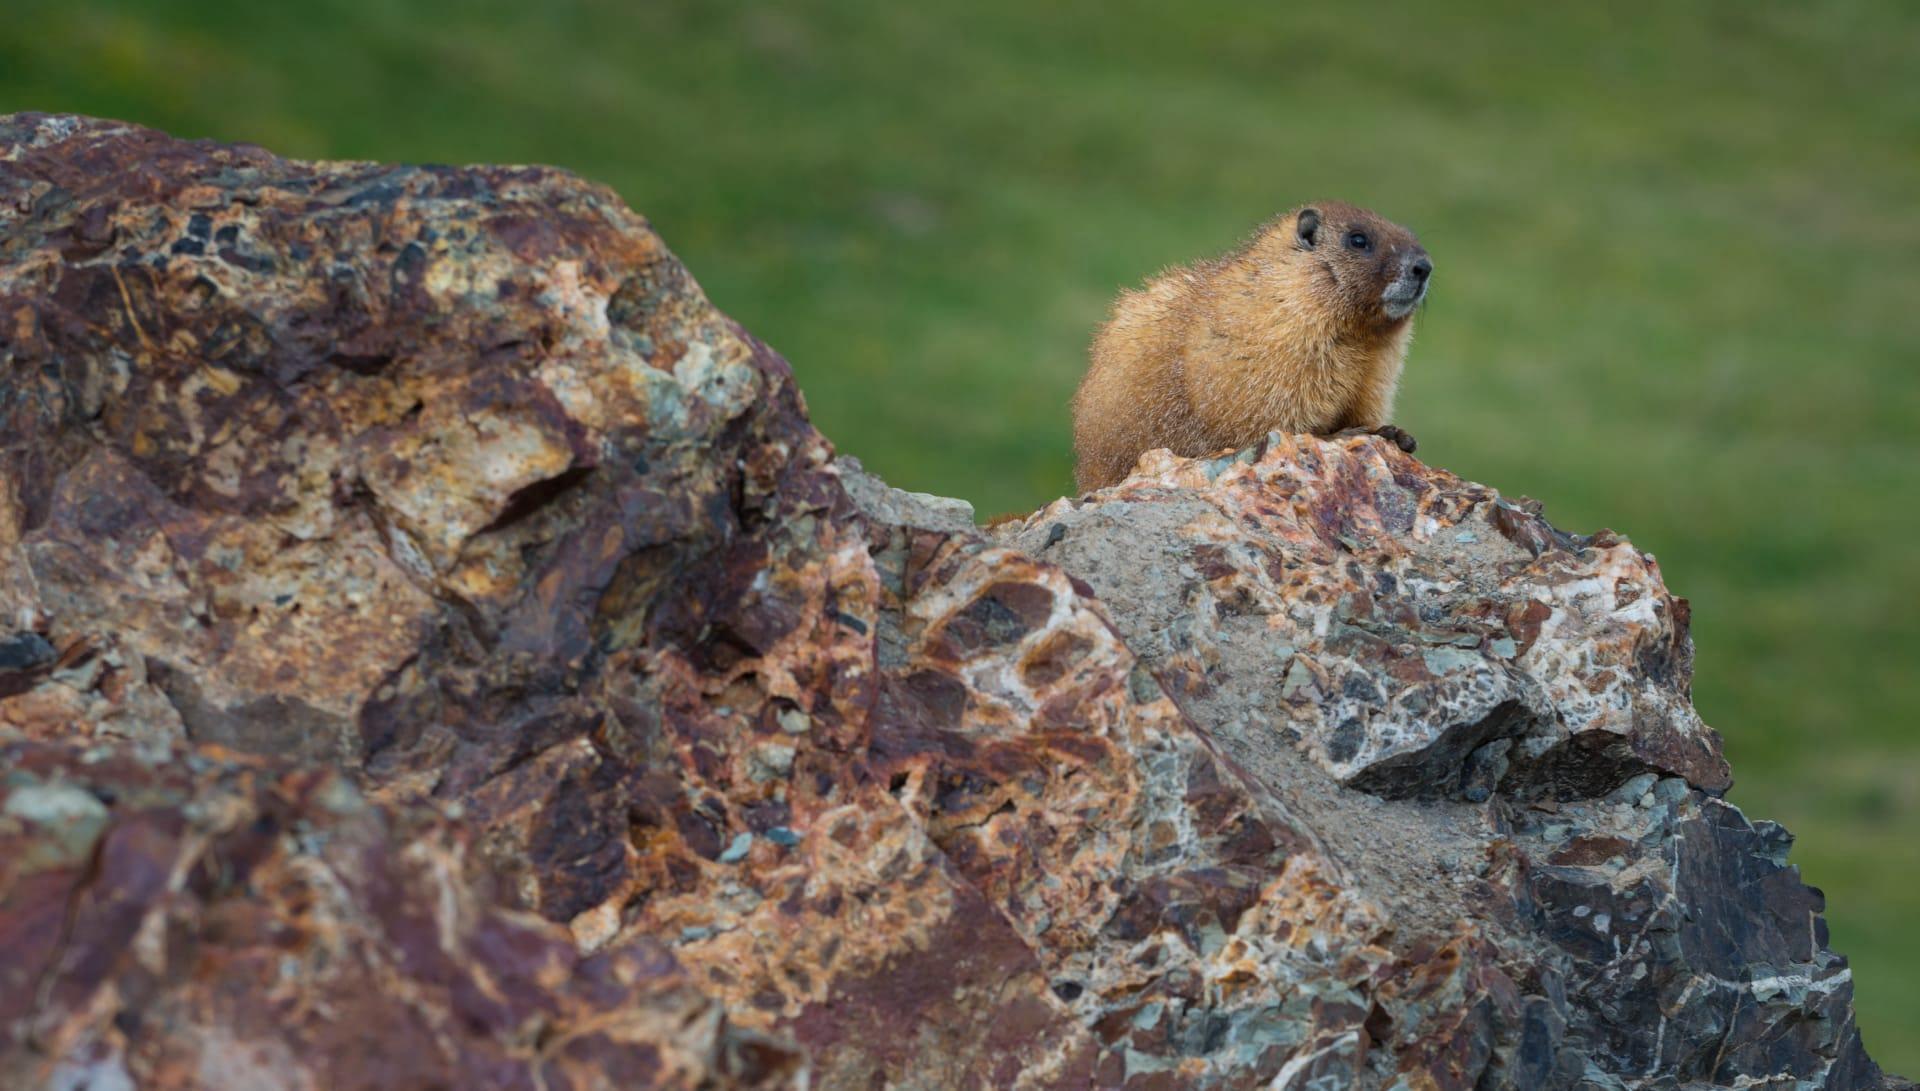 Yellow bellied marmot pictures